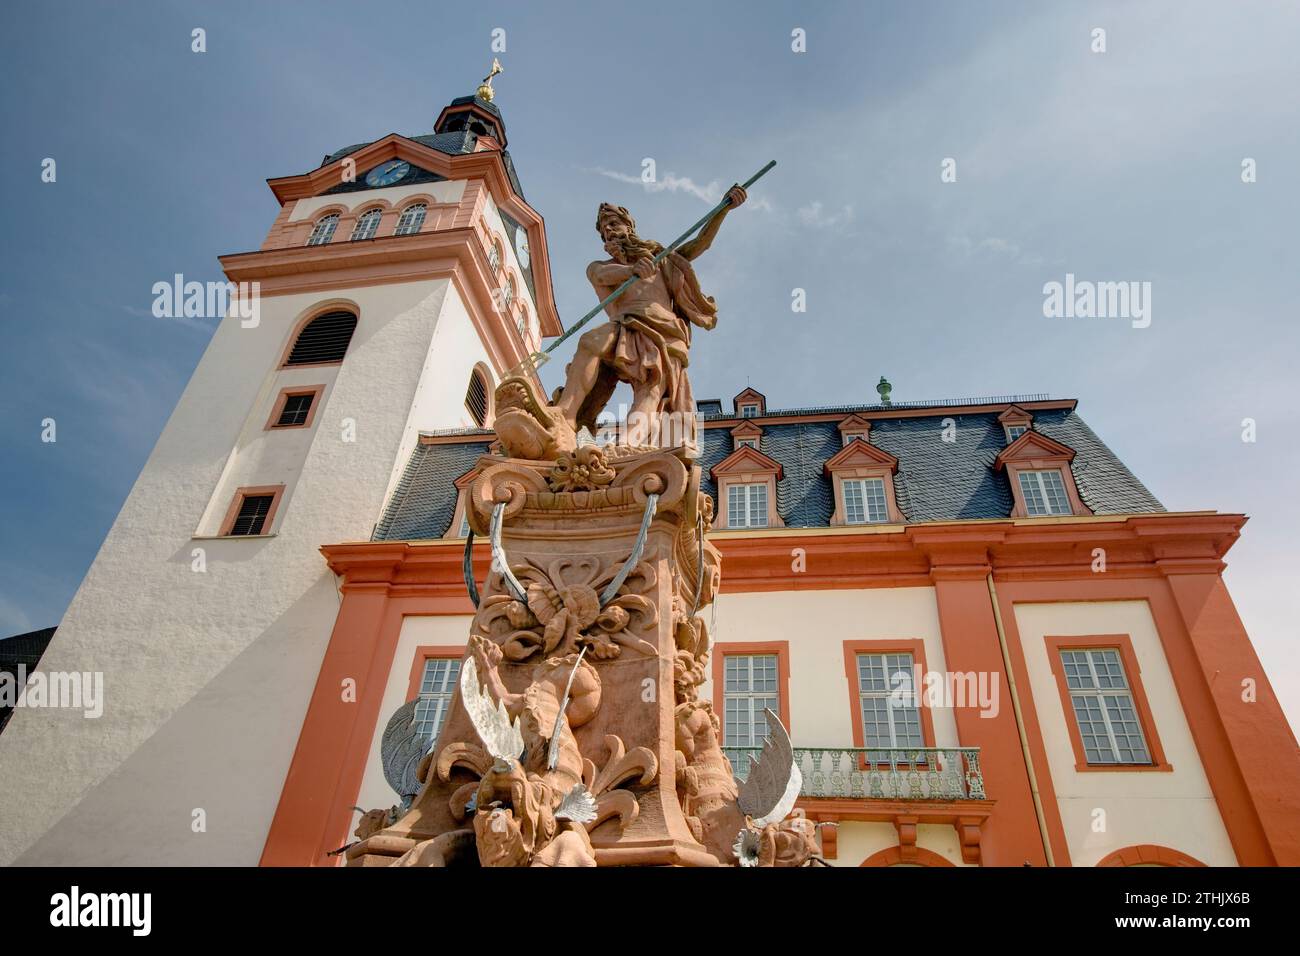 St. George the dragon slayer, city hall at market square, Weilburg an der Lahn, Hesse, Germany, Europe Stock Photo